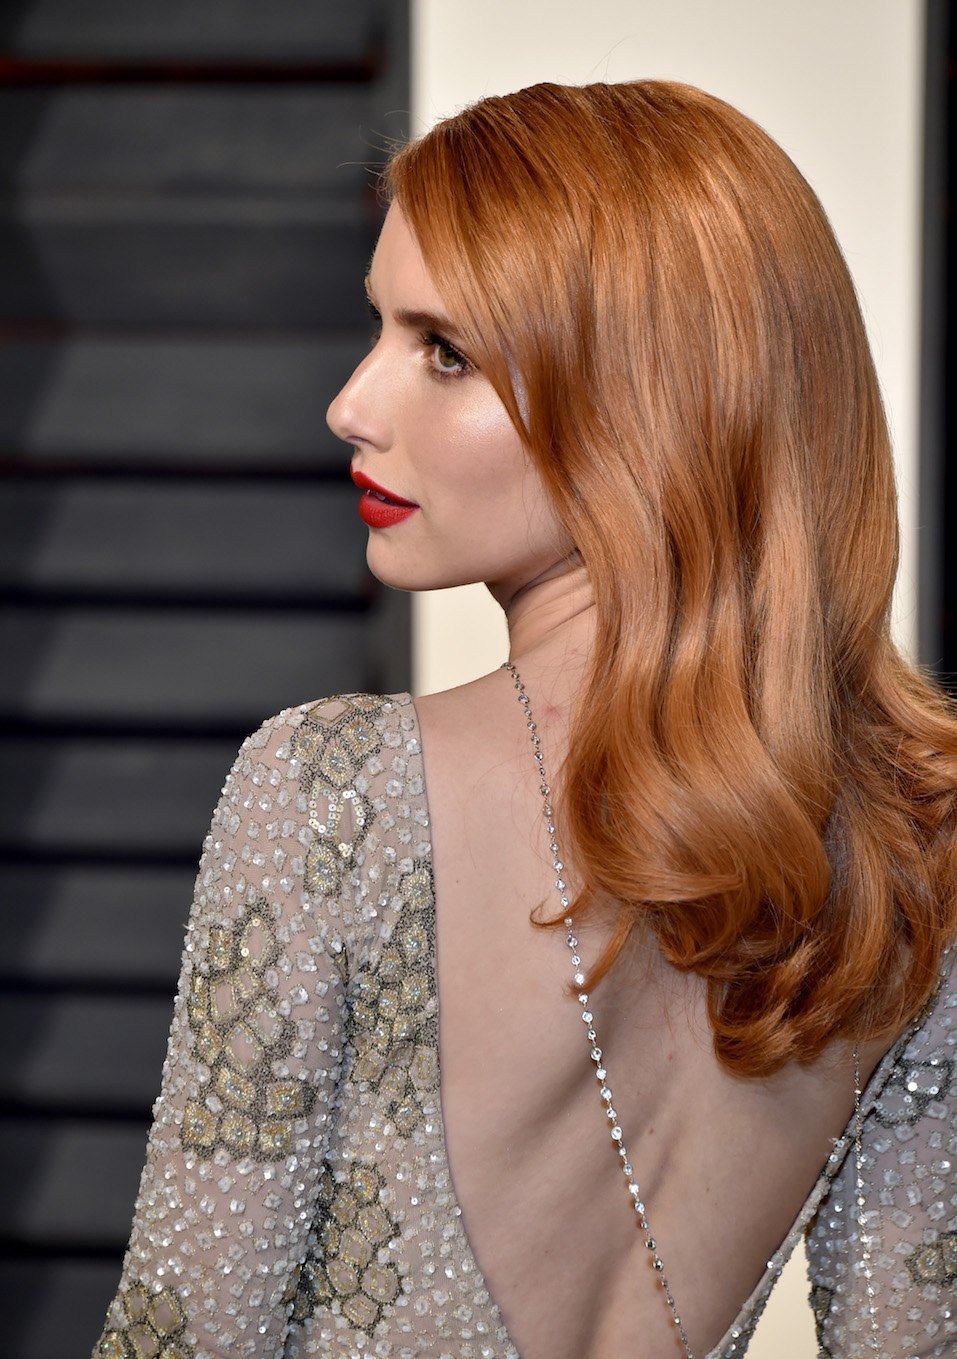 10 Stylish Hair Colors You Should Consider Trying This Summer